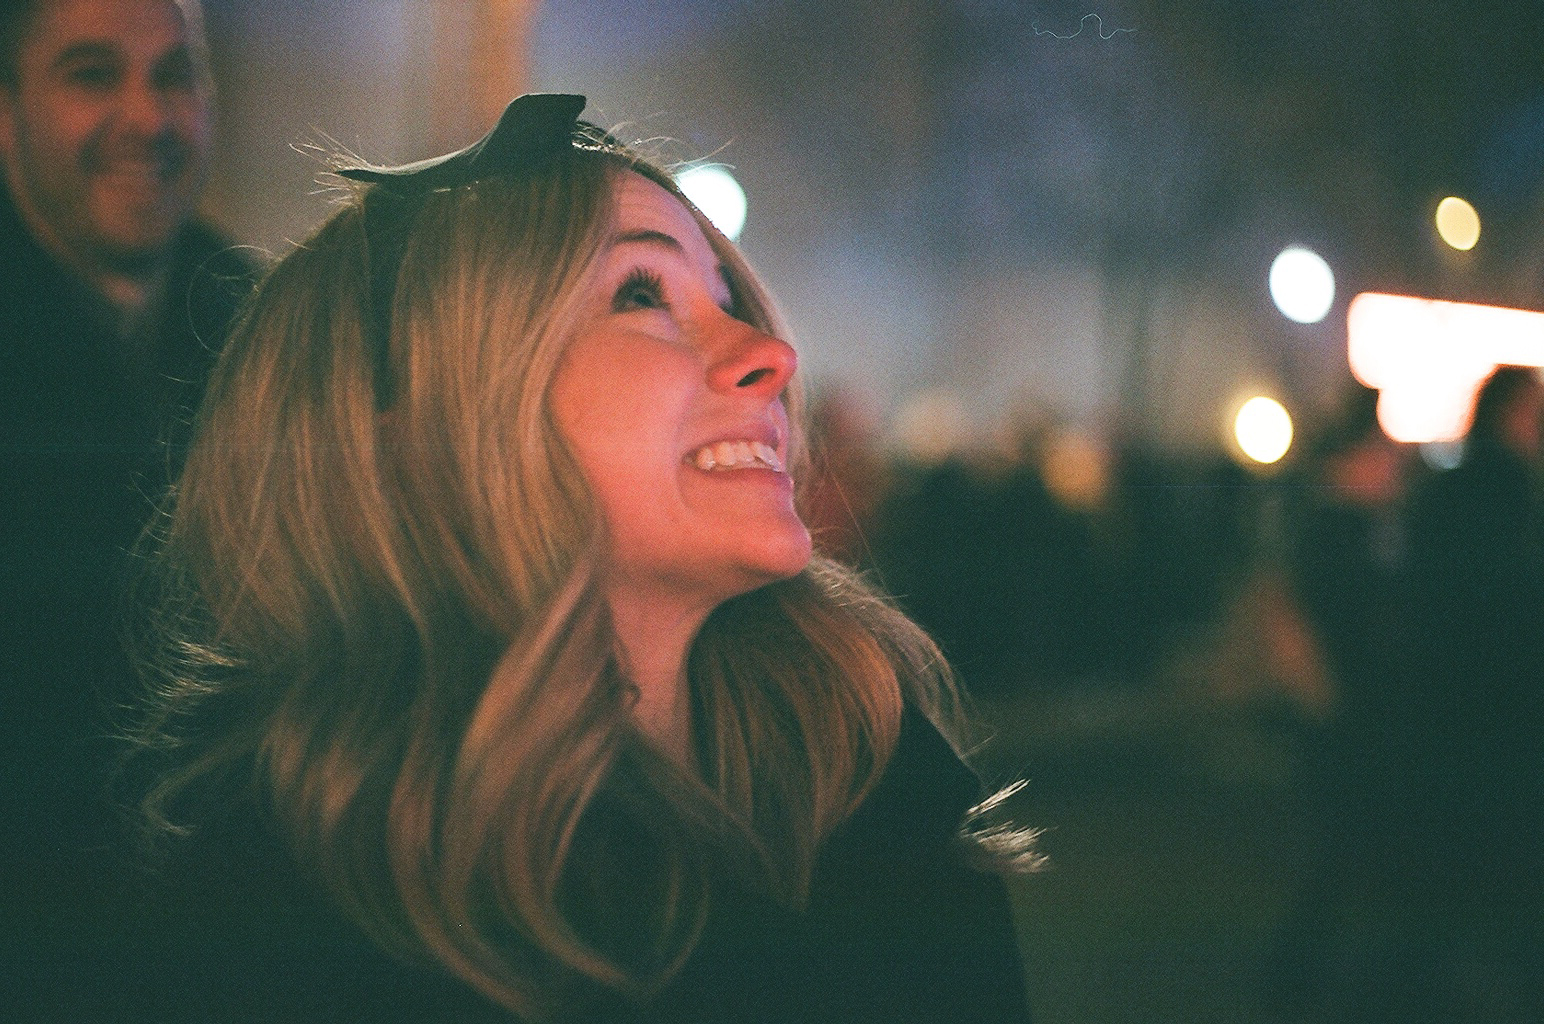 Canon AE-1 on NYE 2014 | beans in a can: thrifty adventures